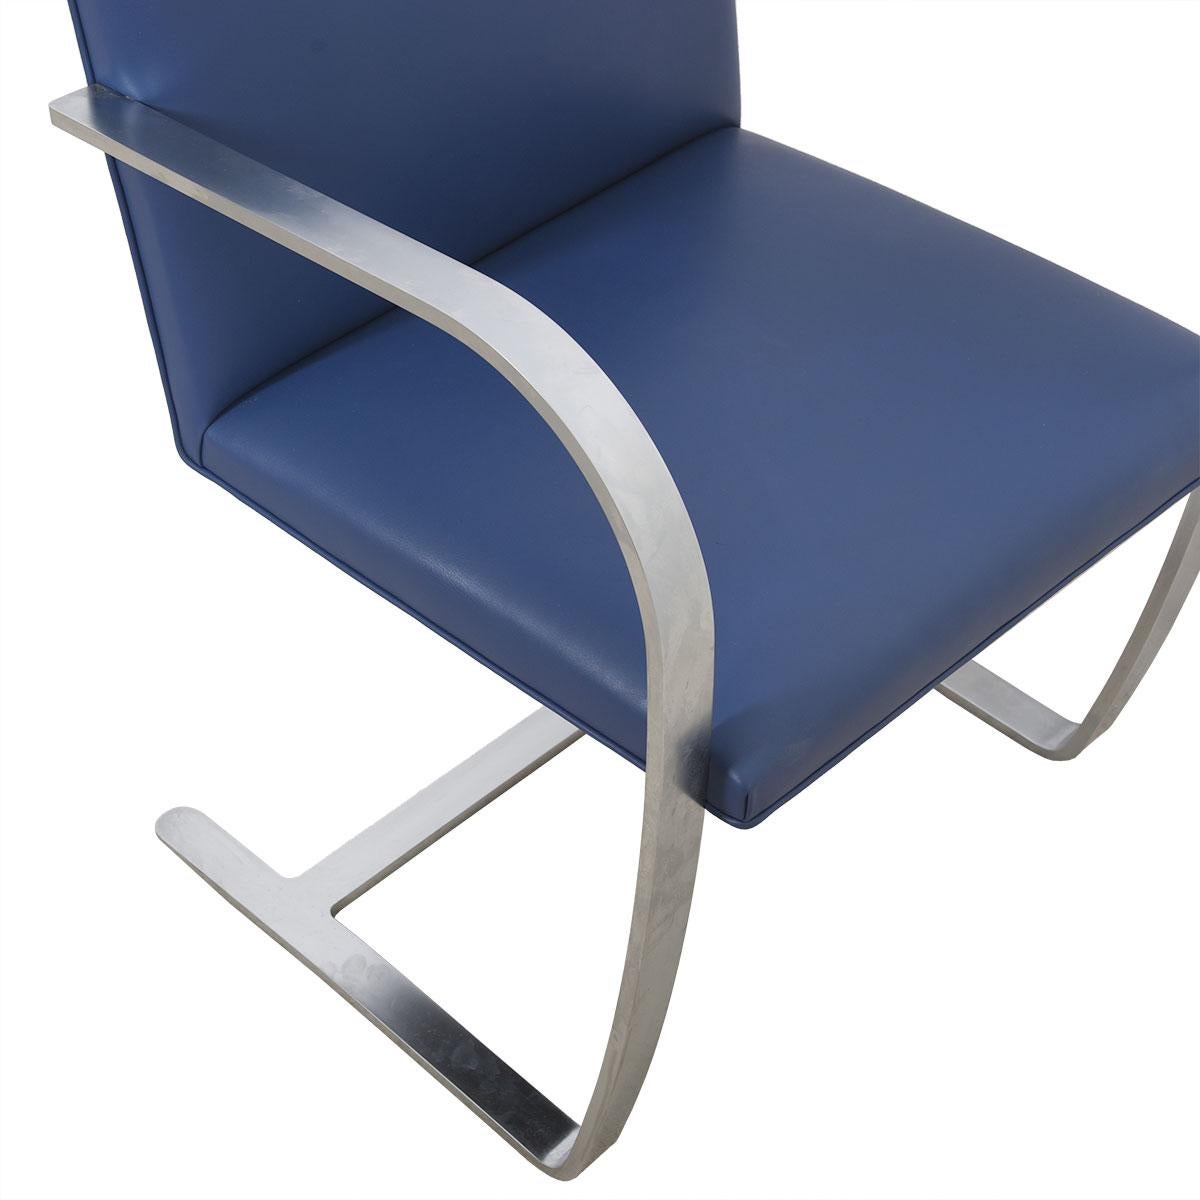 Pair of Stainless Steel Flat Bar Brno Chairs with Cadet Blue Leather Upholstery In Good Condition For Sale In Kensington, MD